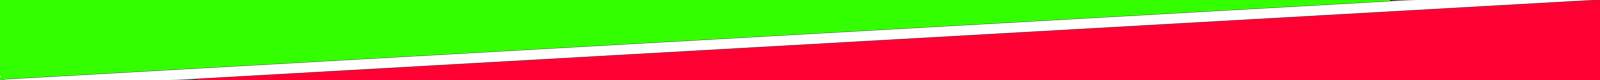 green to red